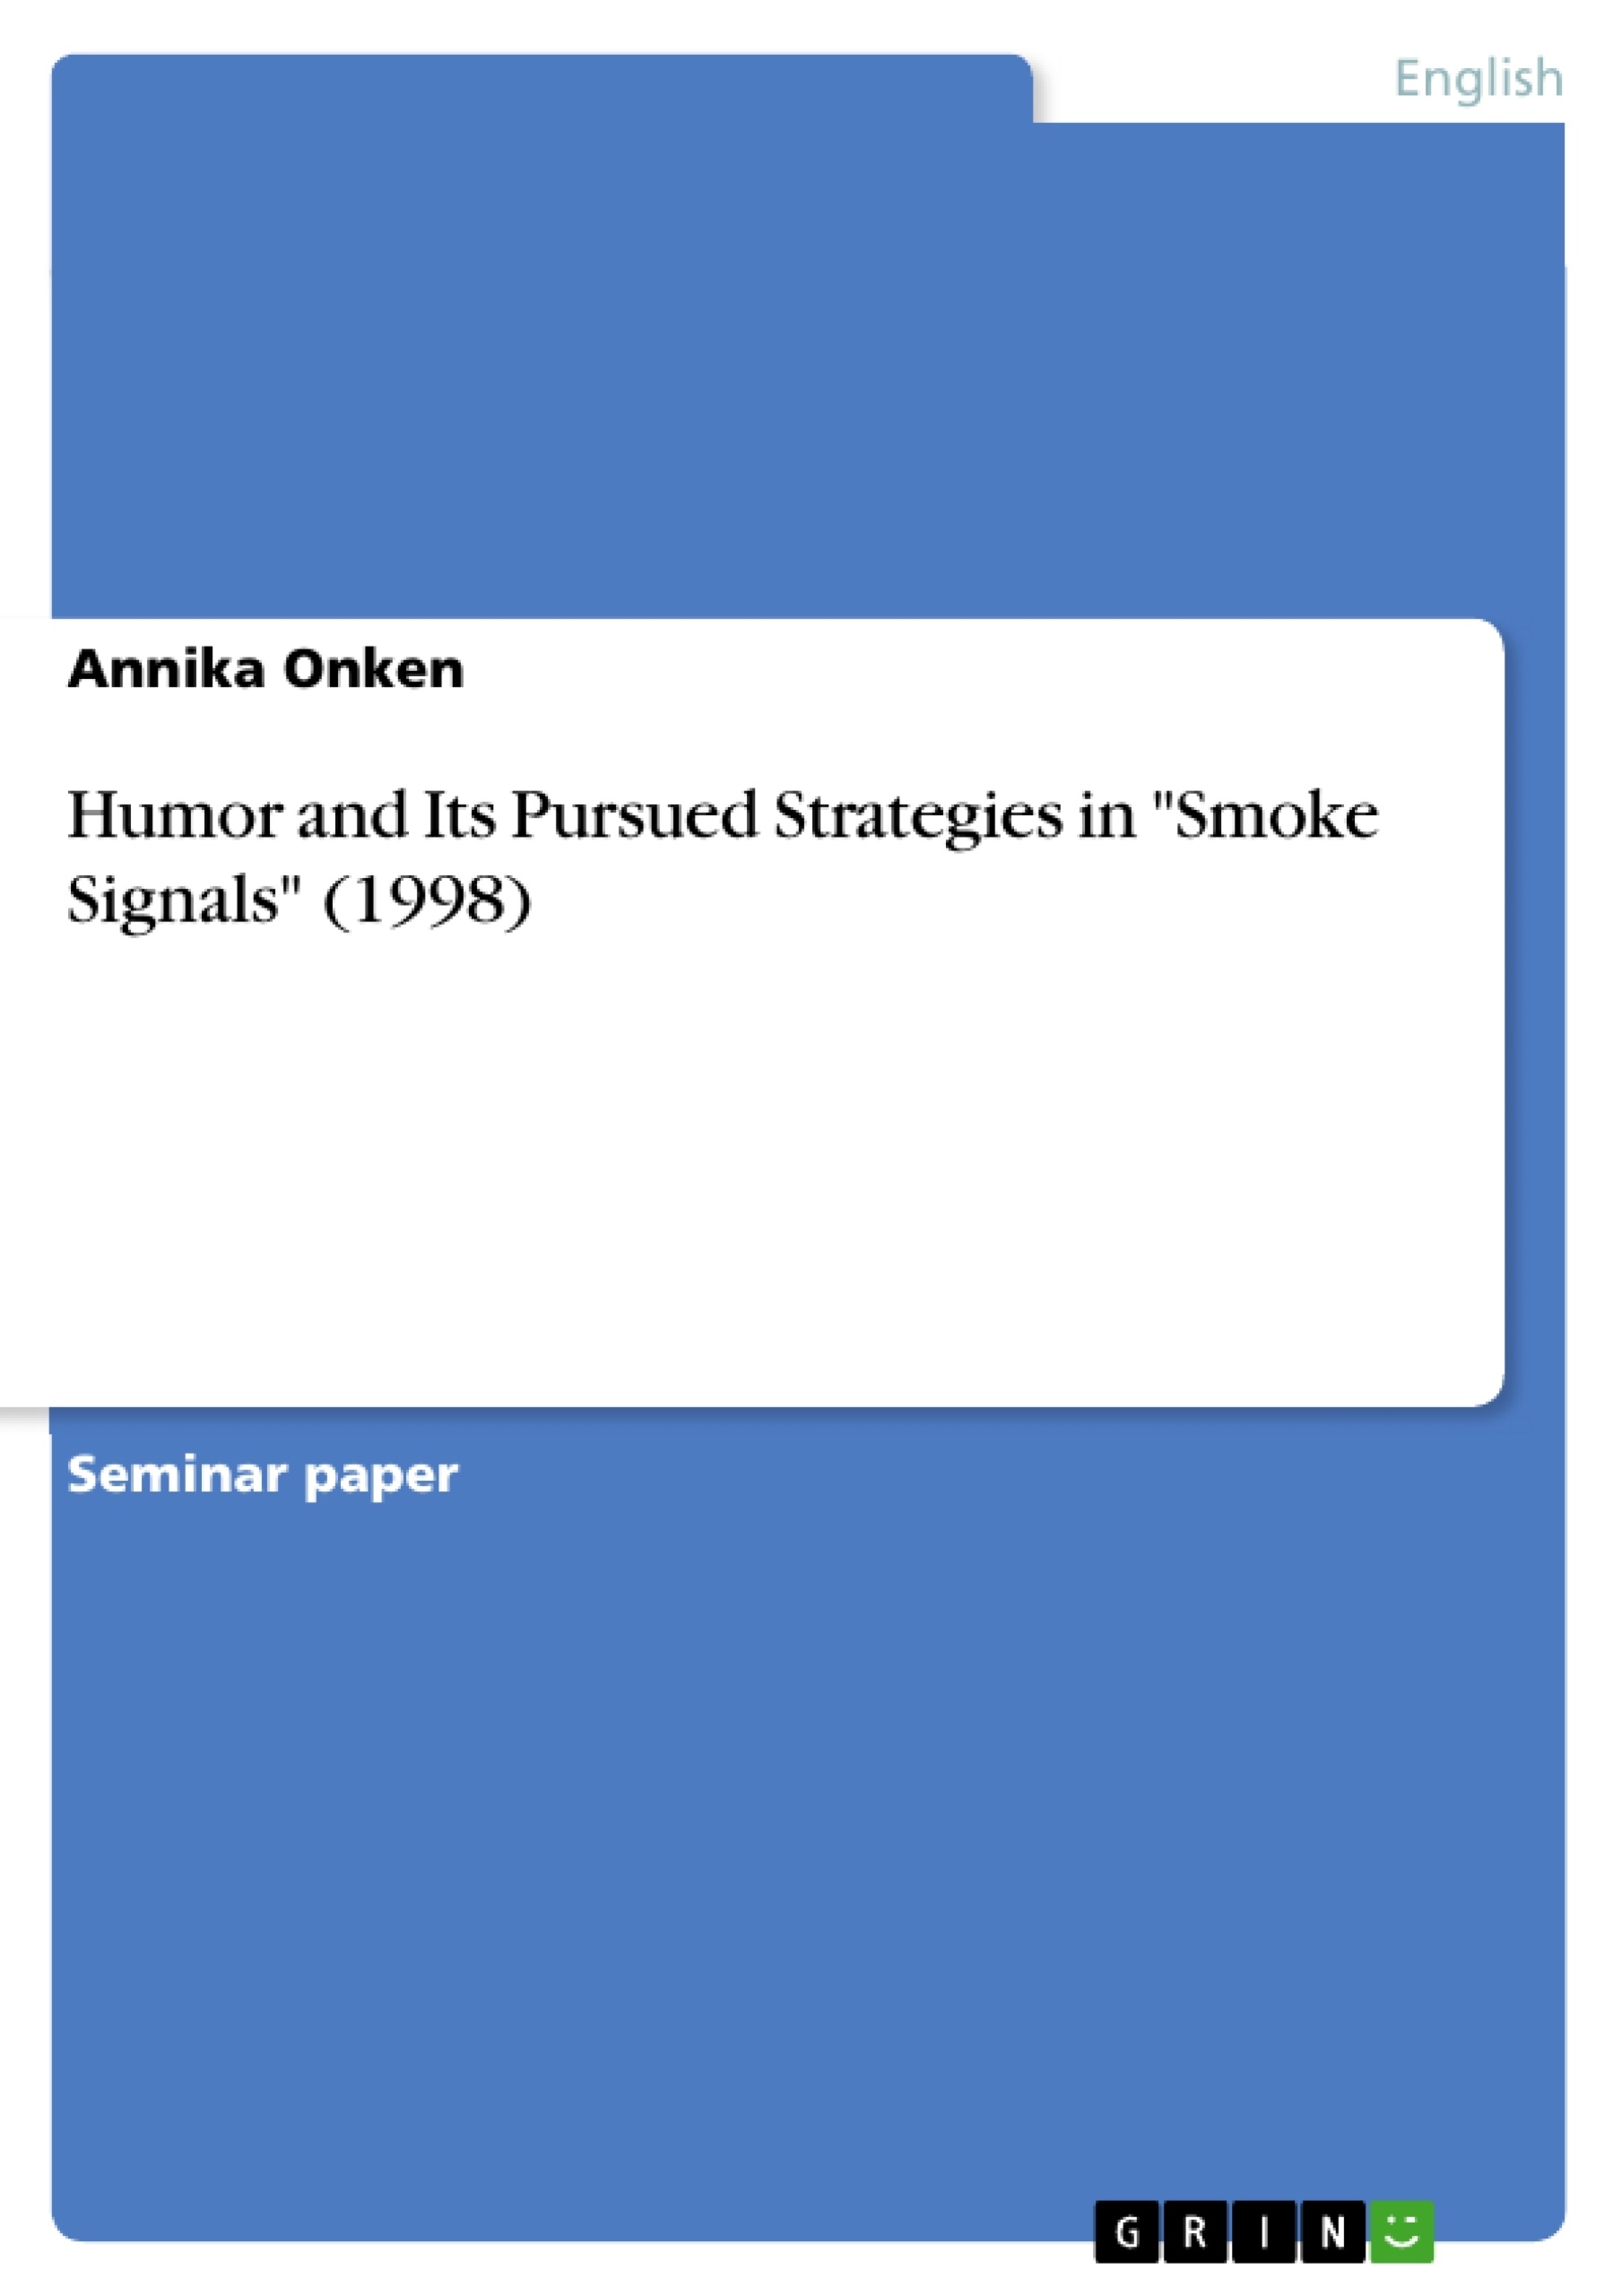 Title: Humor and Its Pursued Strategies in "Smoke Signals" (1998)